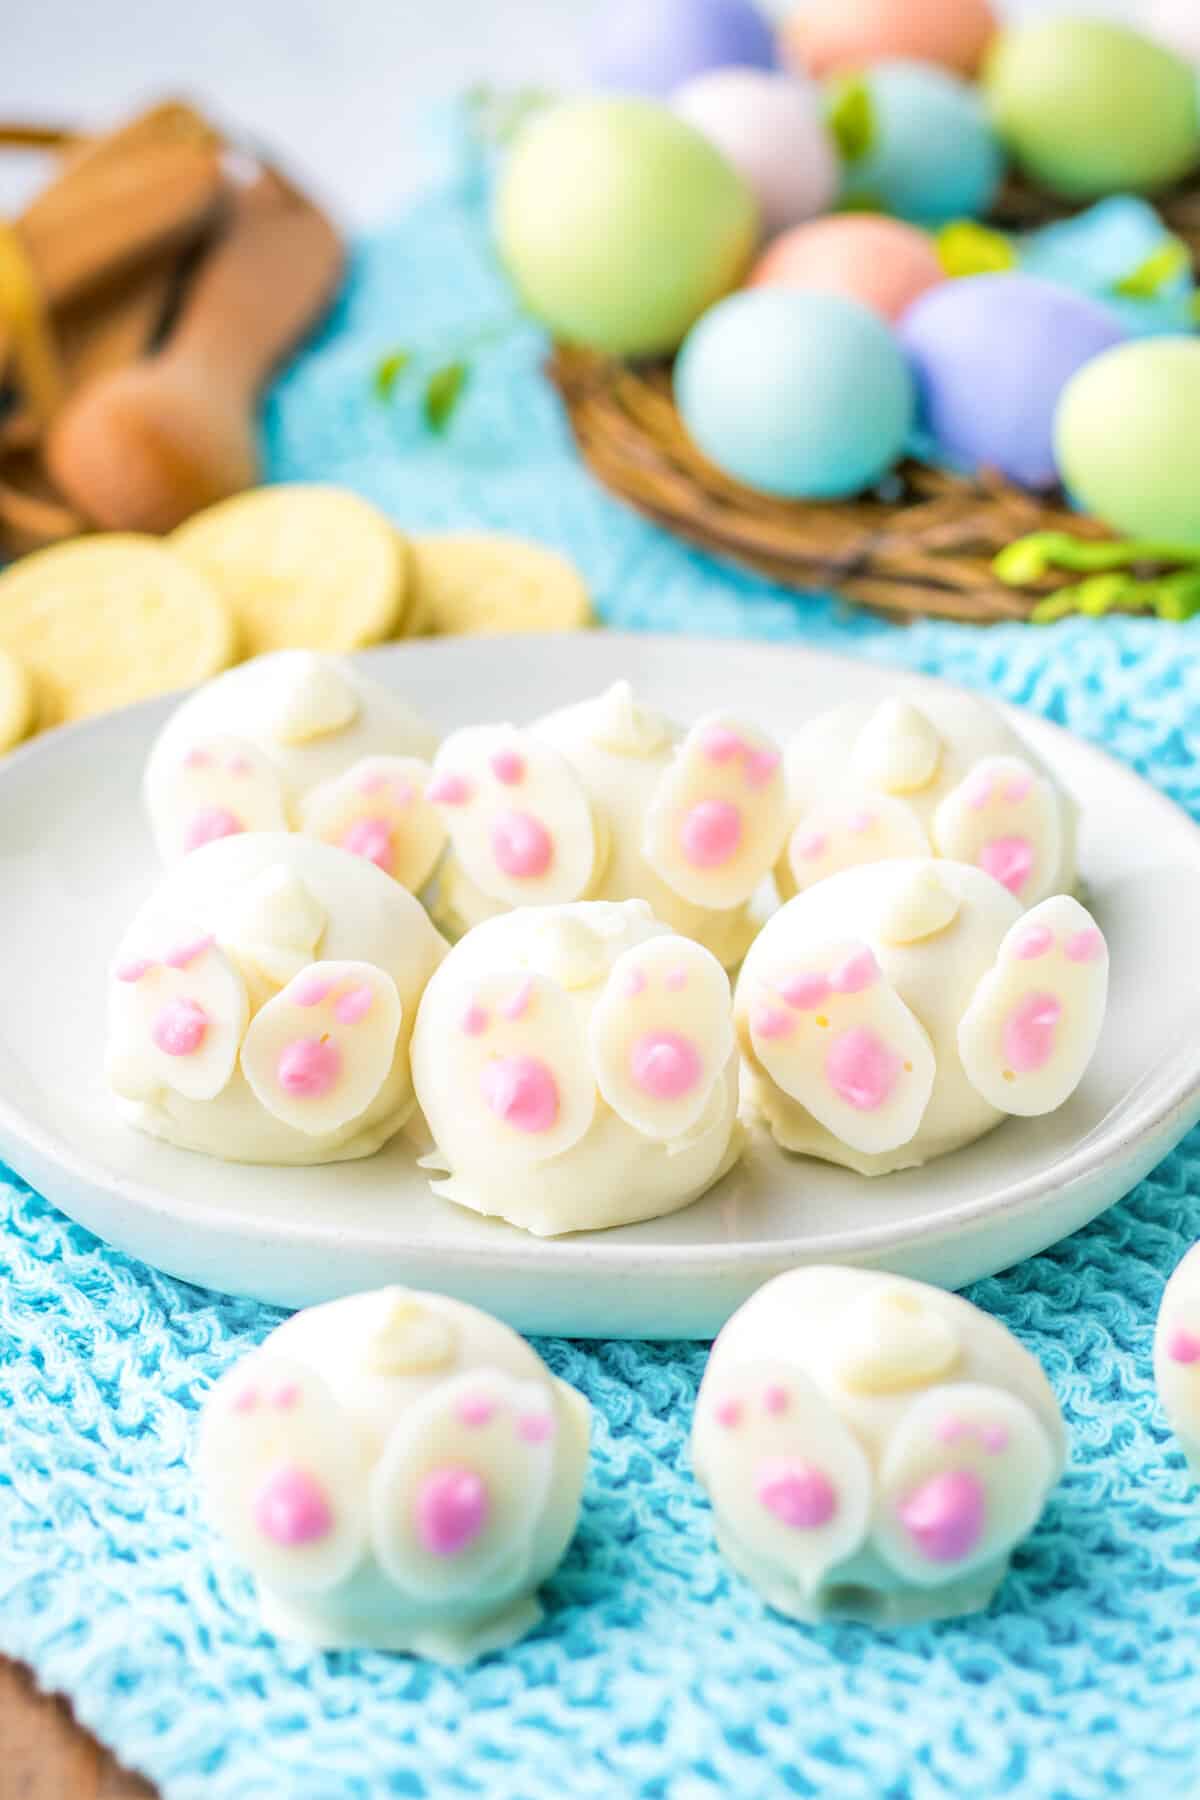 Bunny oreo balls decorated with feet and tails to look like bunny butts. Lemon oreo cookies and easter eggs are in the background.